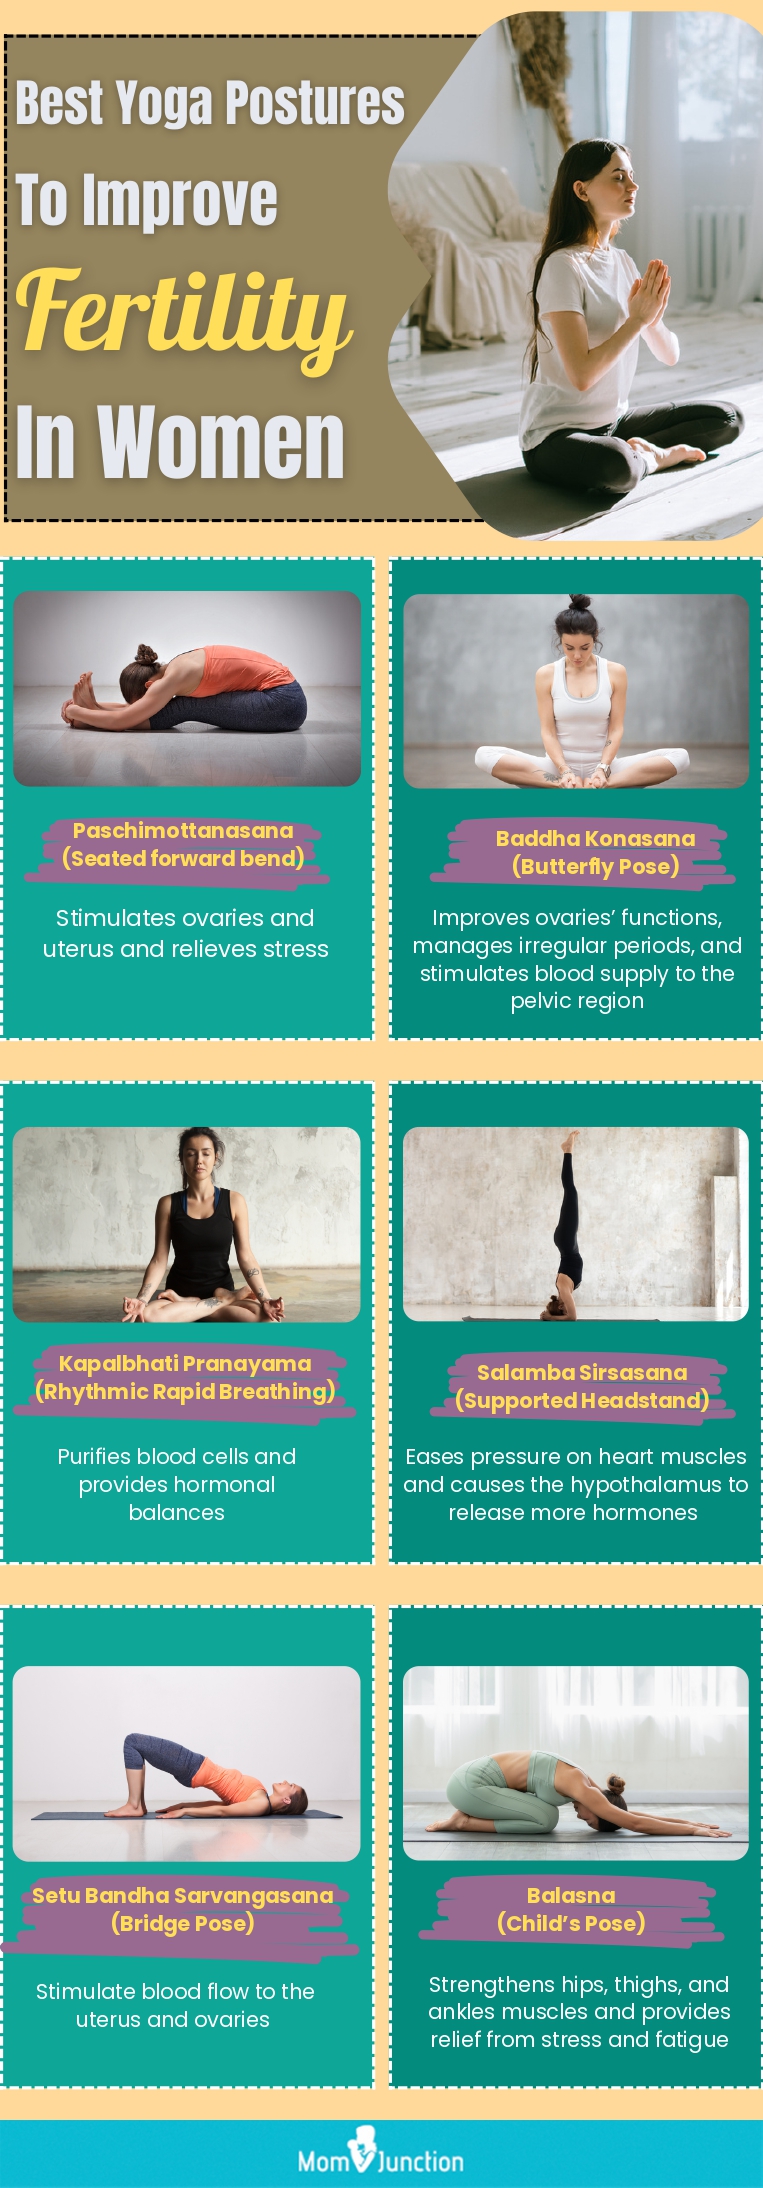 best yoga postures to improve fertility in women (infographic)